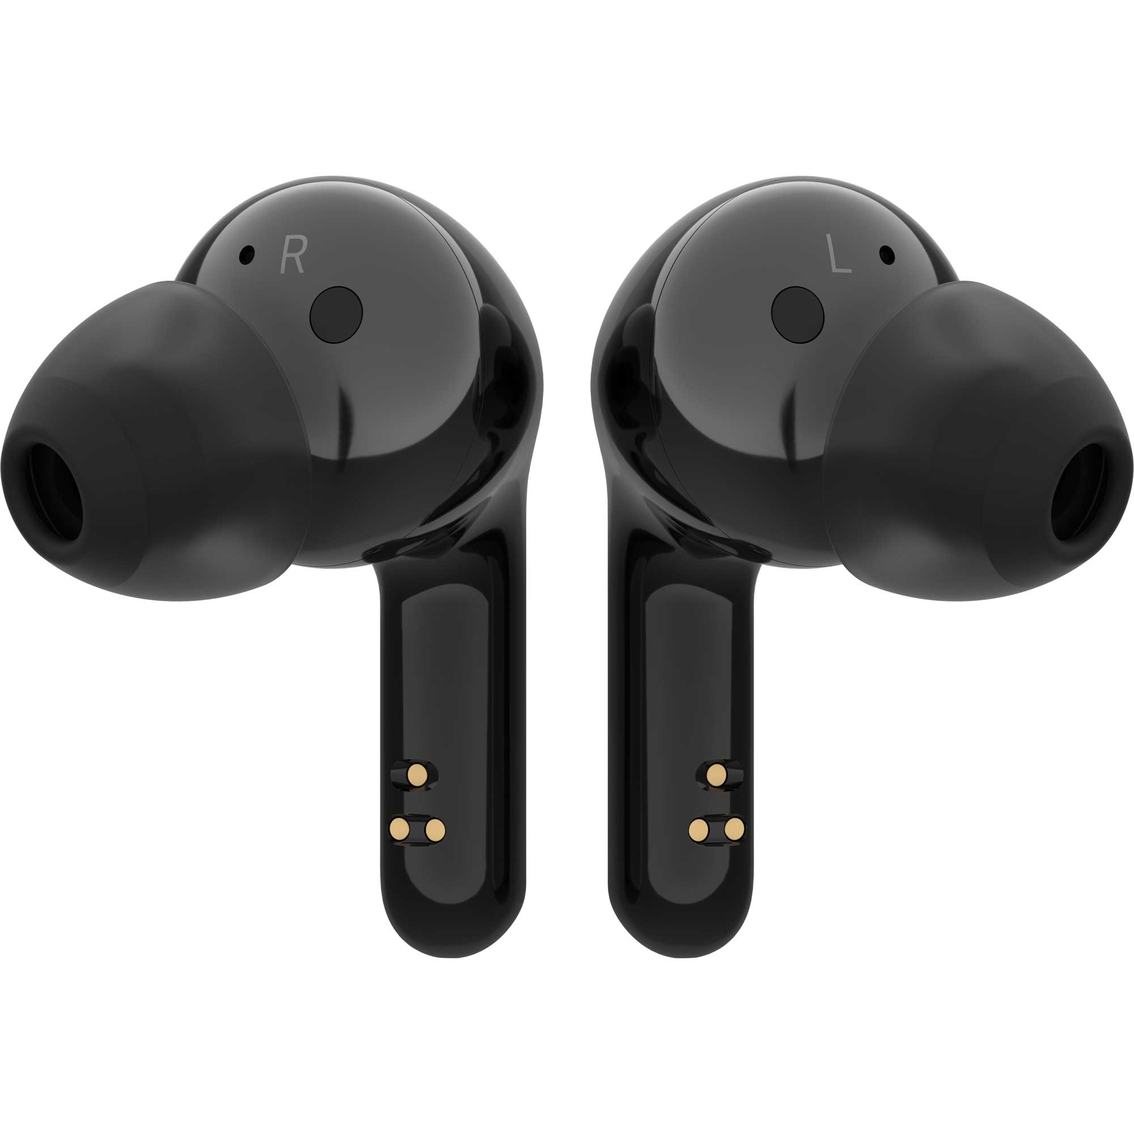 LG Tone Free Wireless Earbuds with Charging Case